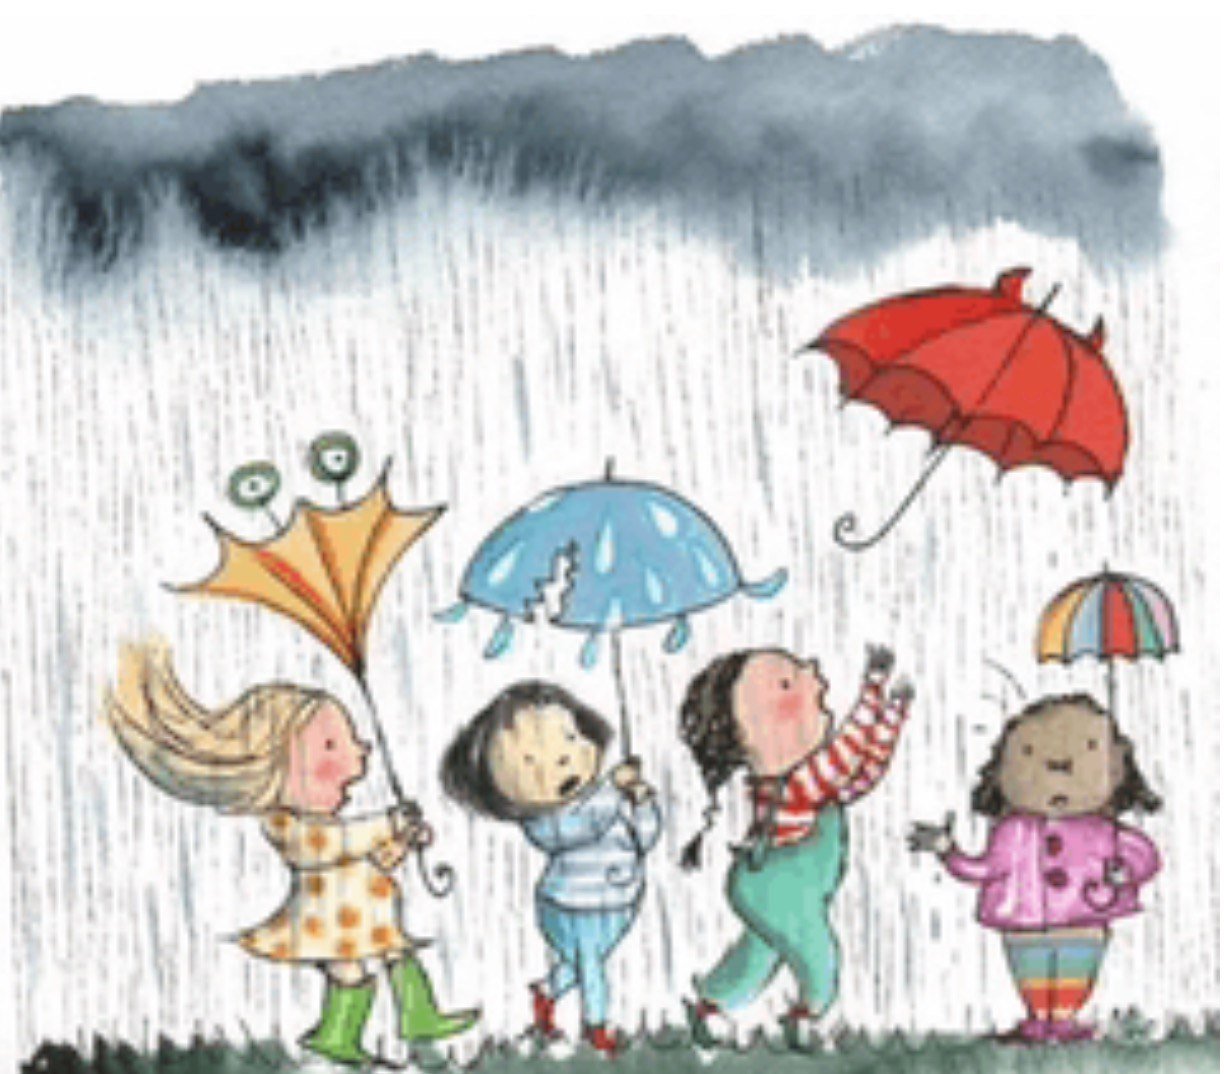 Looks like lots of rain and wind tomorrow so the Book Swap will be closed. We plan to open on Saturday 4/13.